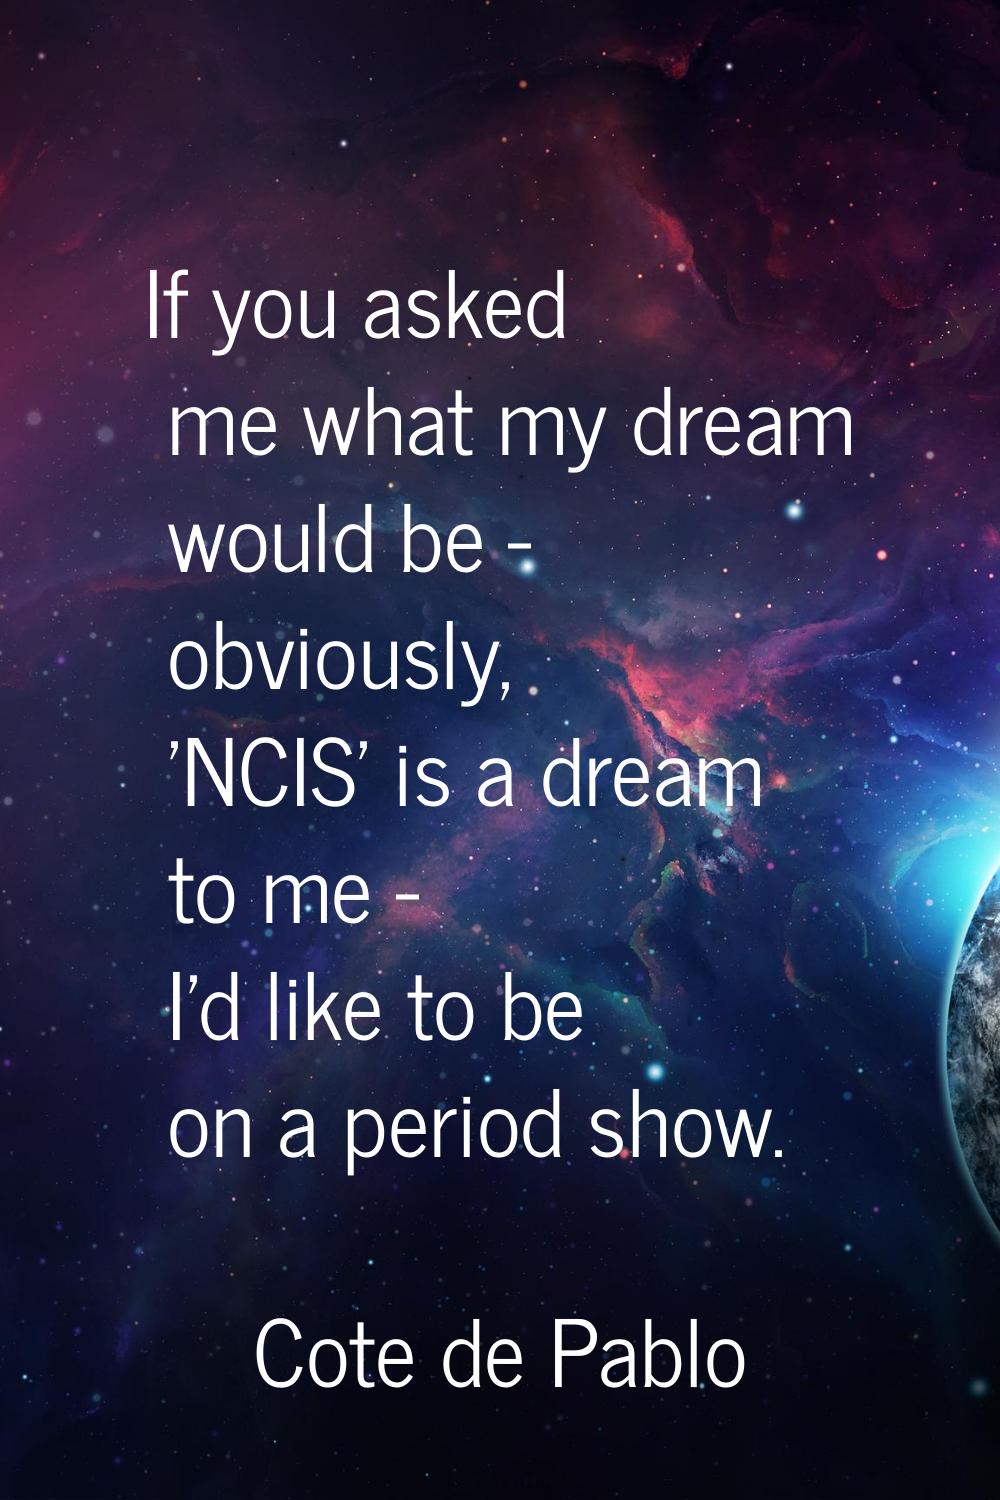 If you asked me what my dream would be - obviously, 'NCIS' is a dream to me - I'd like to be on a p